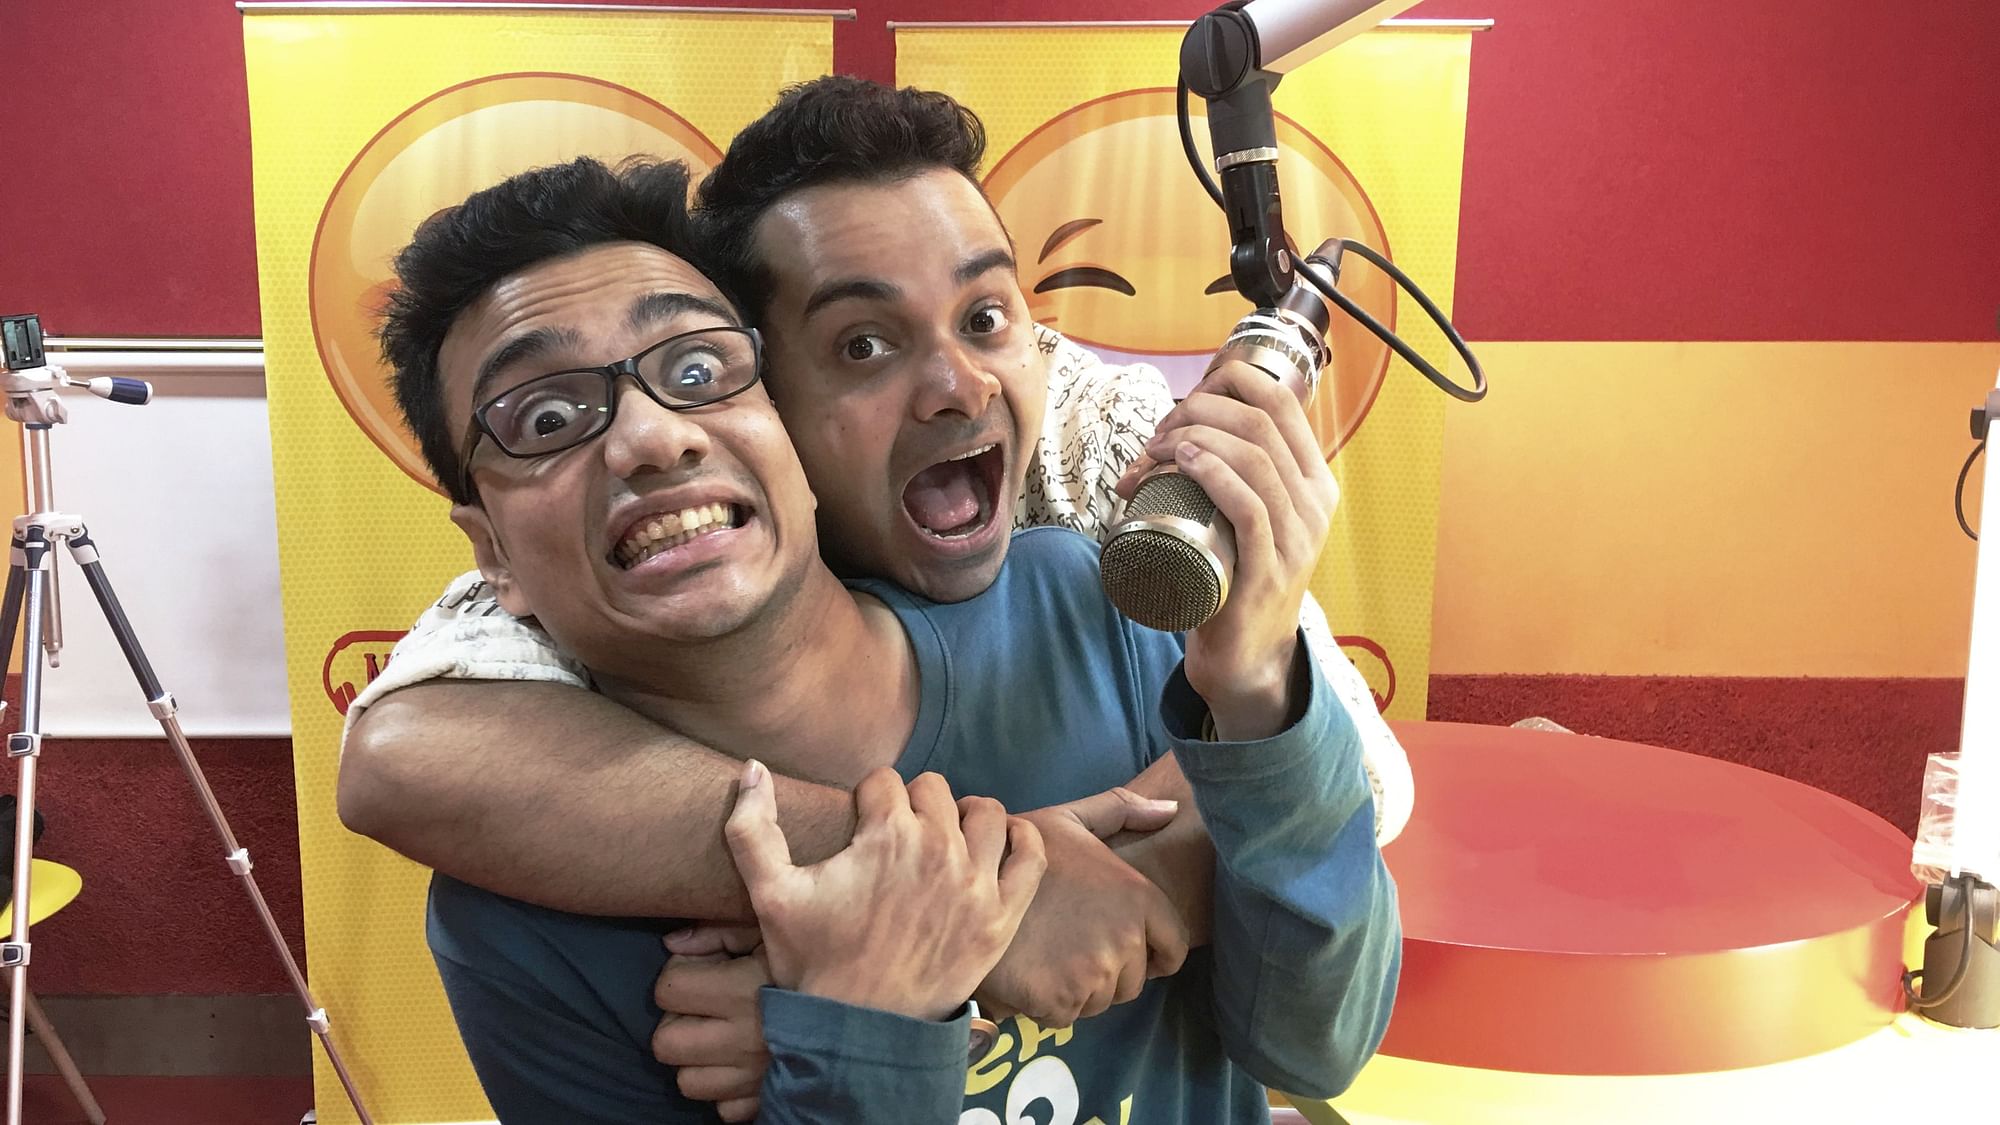 <b>The Quint </b>caught up with Radio Mirchi RJs Somak &amp; Agni aka ‘Maa’ &amp; ‘Babu’ from the famous webseries ‘O Maa Go’ to discuss why elections in Kolkata, Madan Mitra’s lives, bed tea and more.